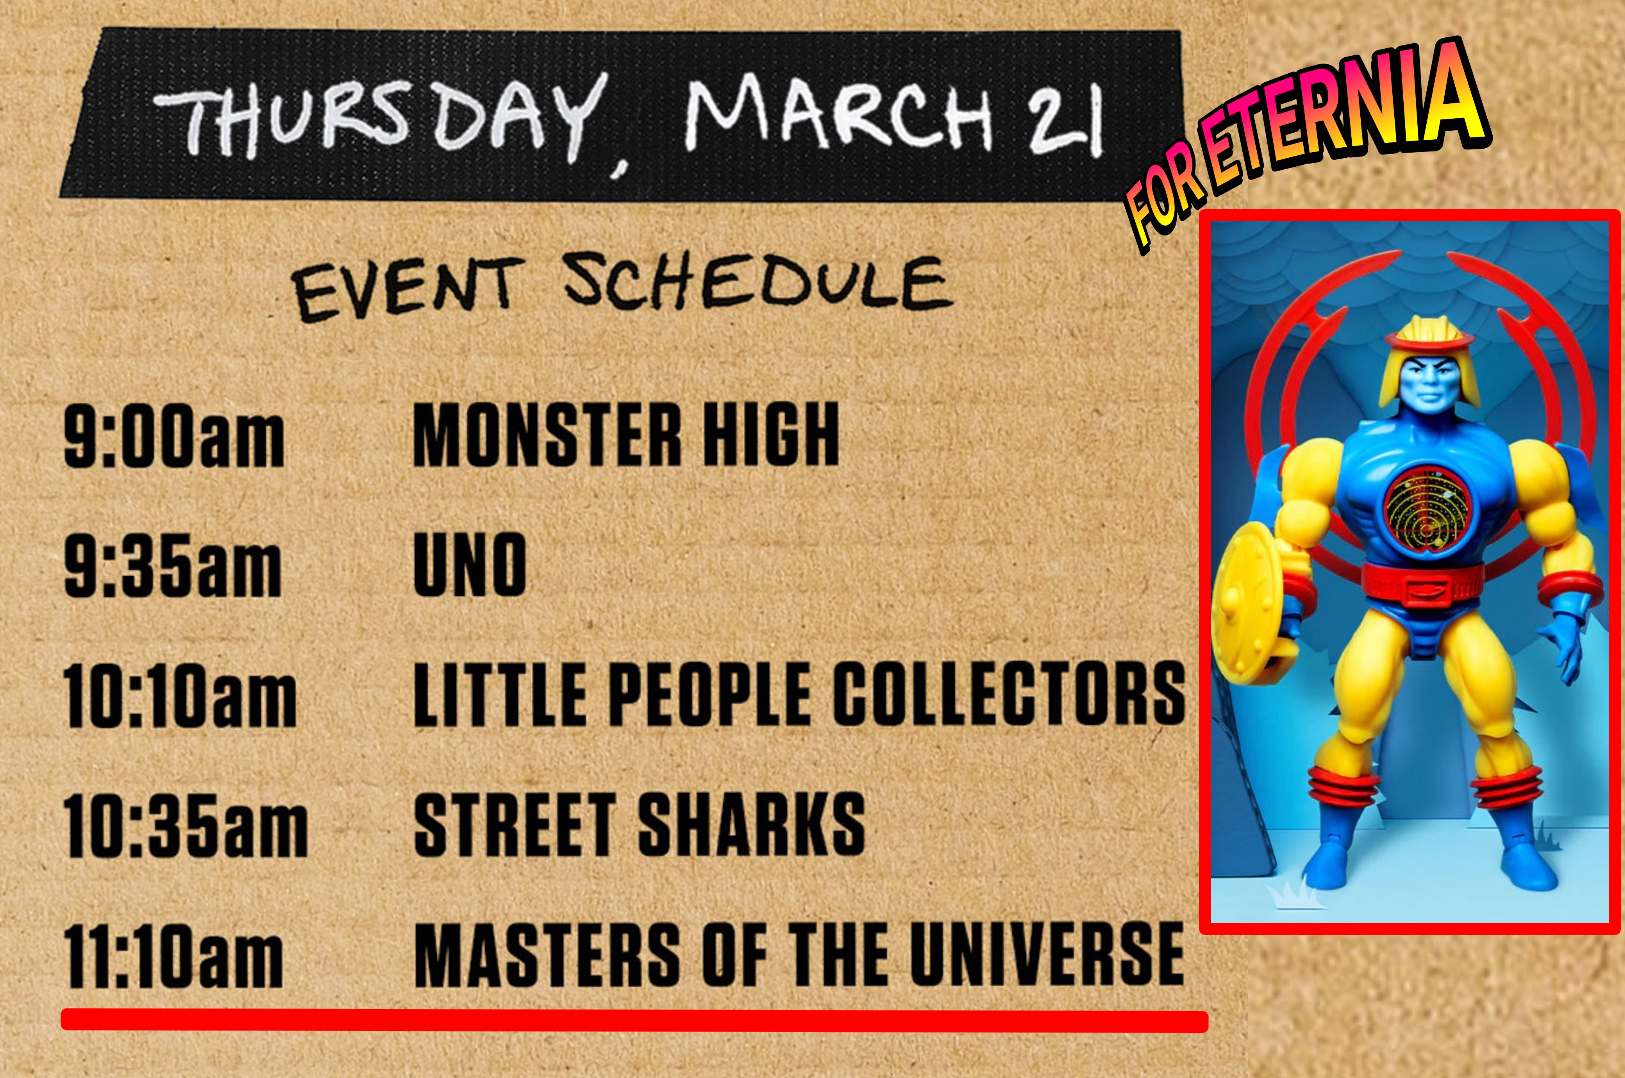 MOTU is scheduled this Thursday (3/21) for the ”Mattel Creations REVEALED” Virtual Event – Origins Sy-Klone figure is also confirmed!